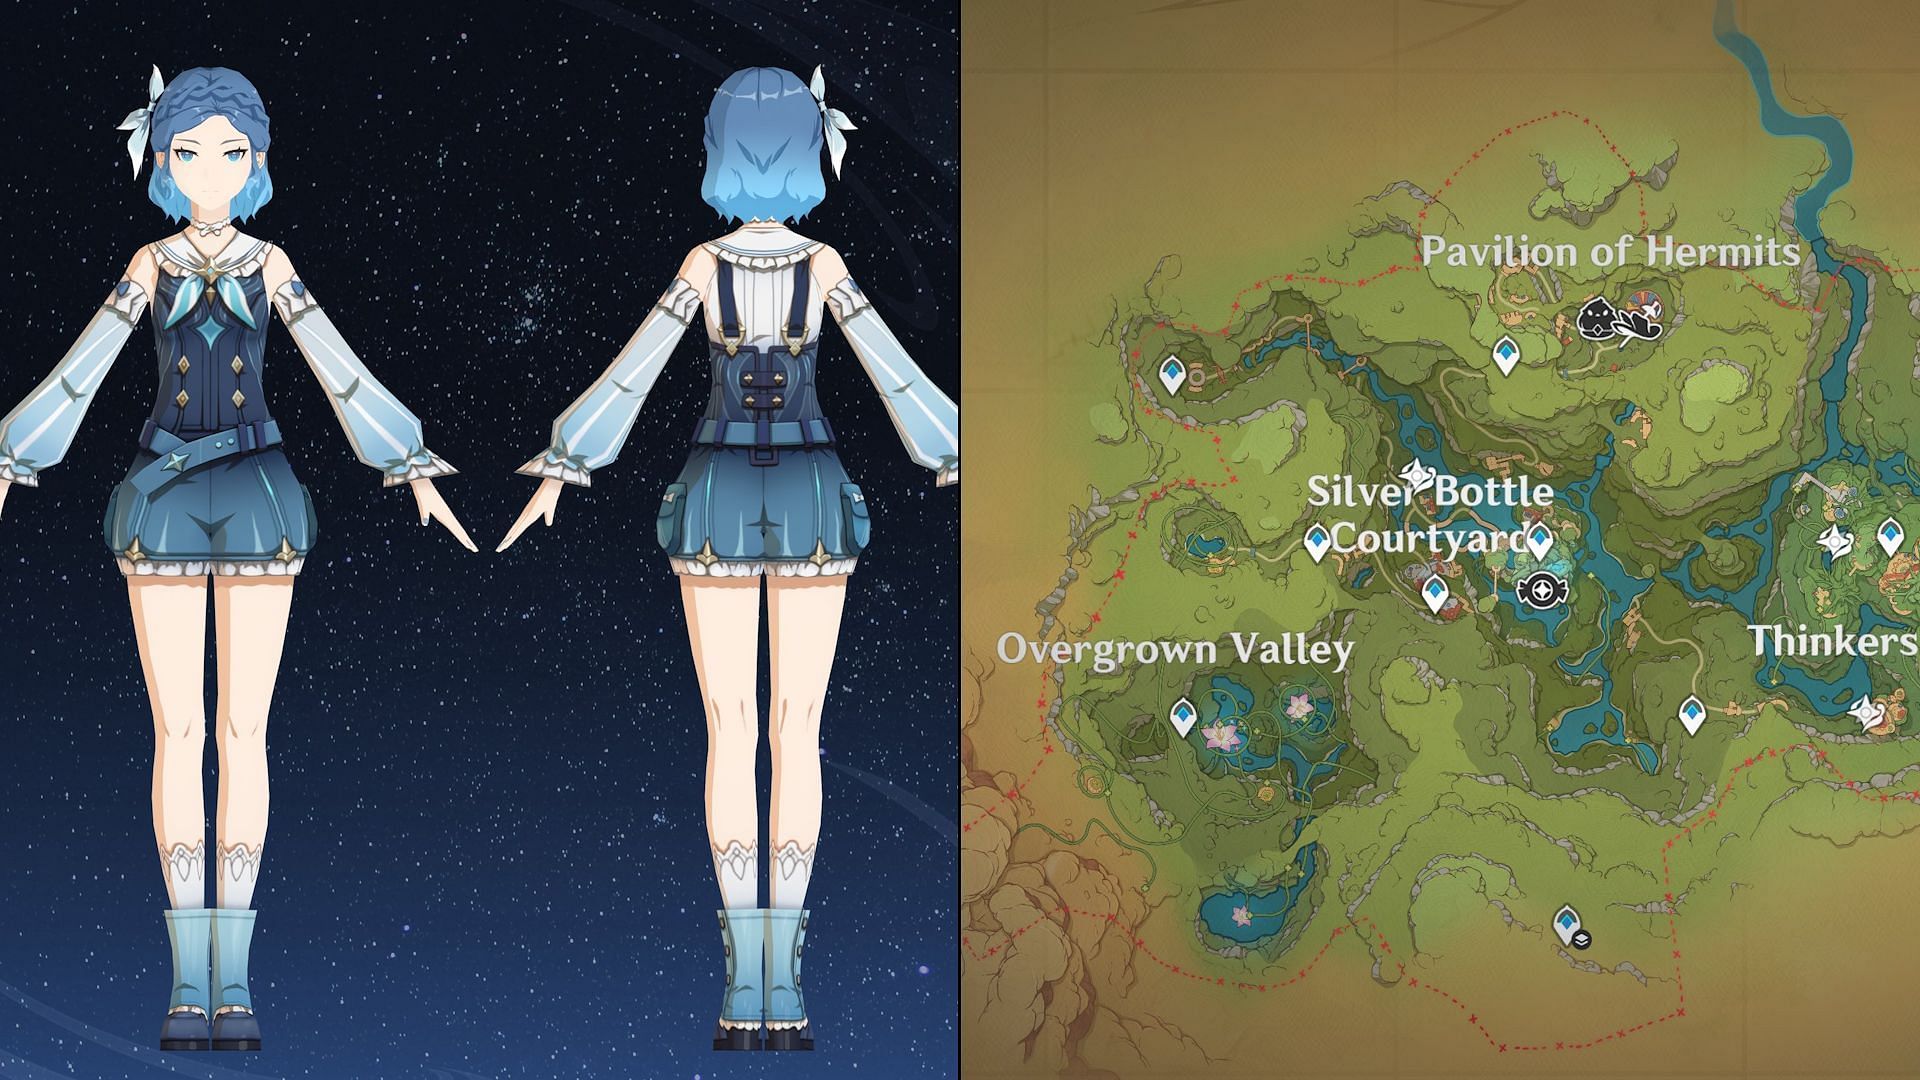 The new character and map